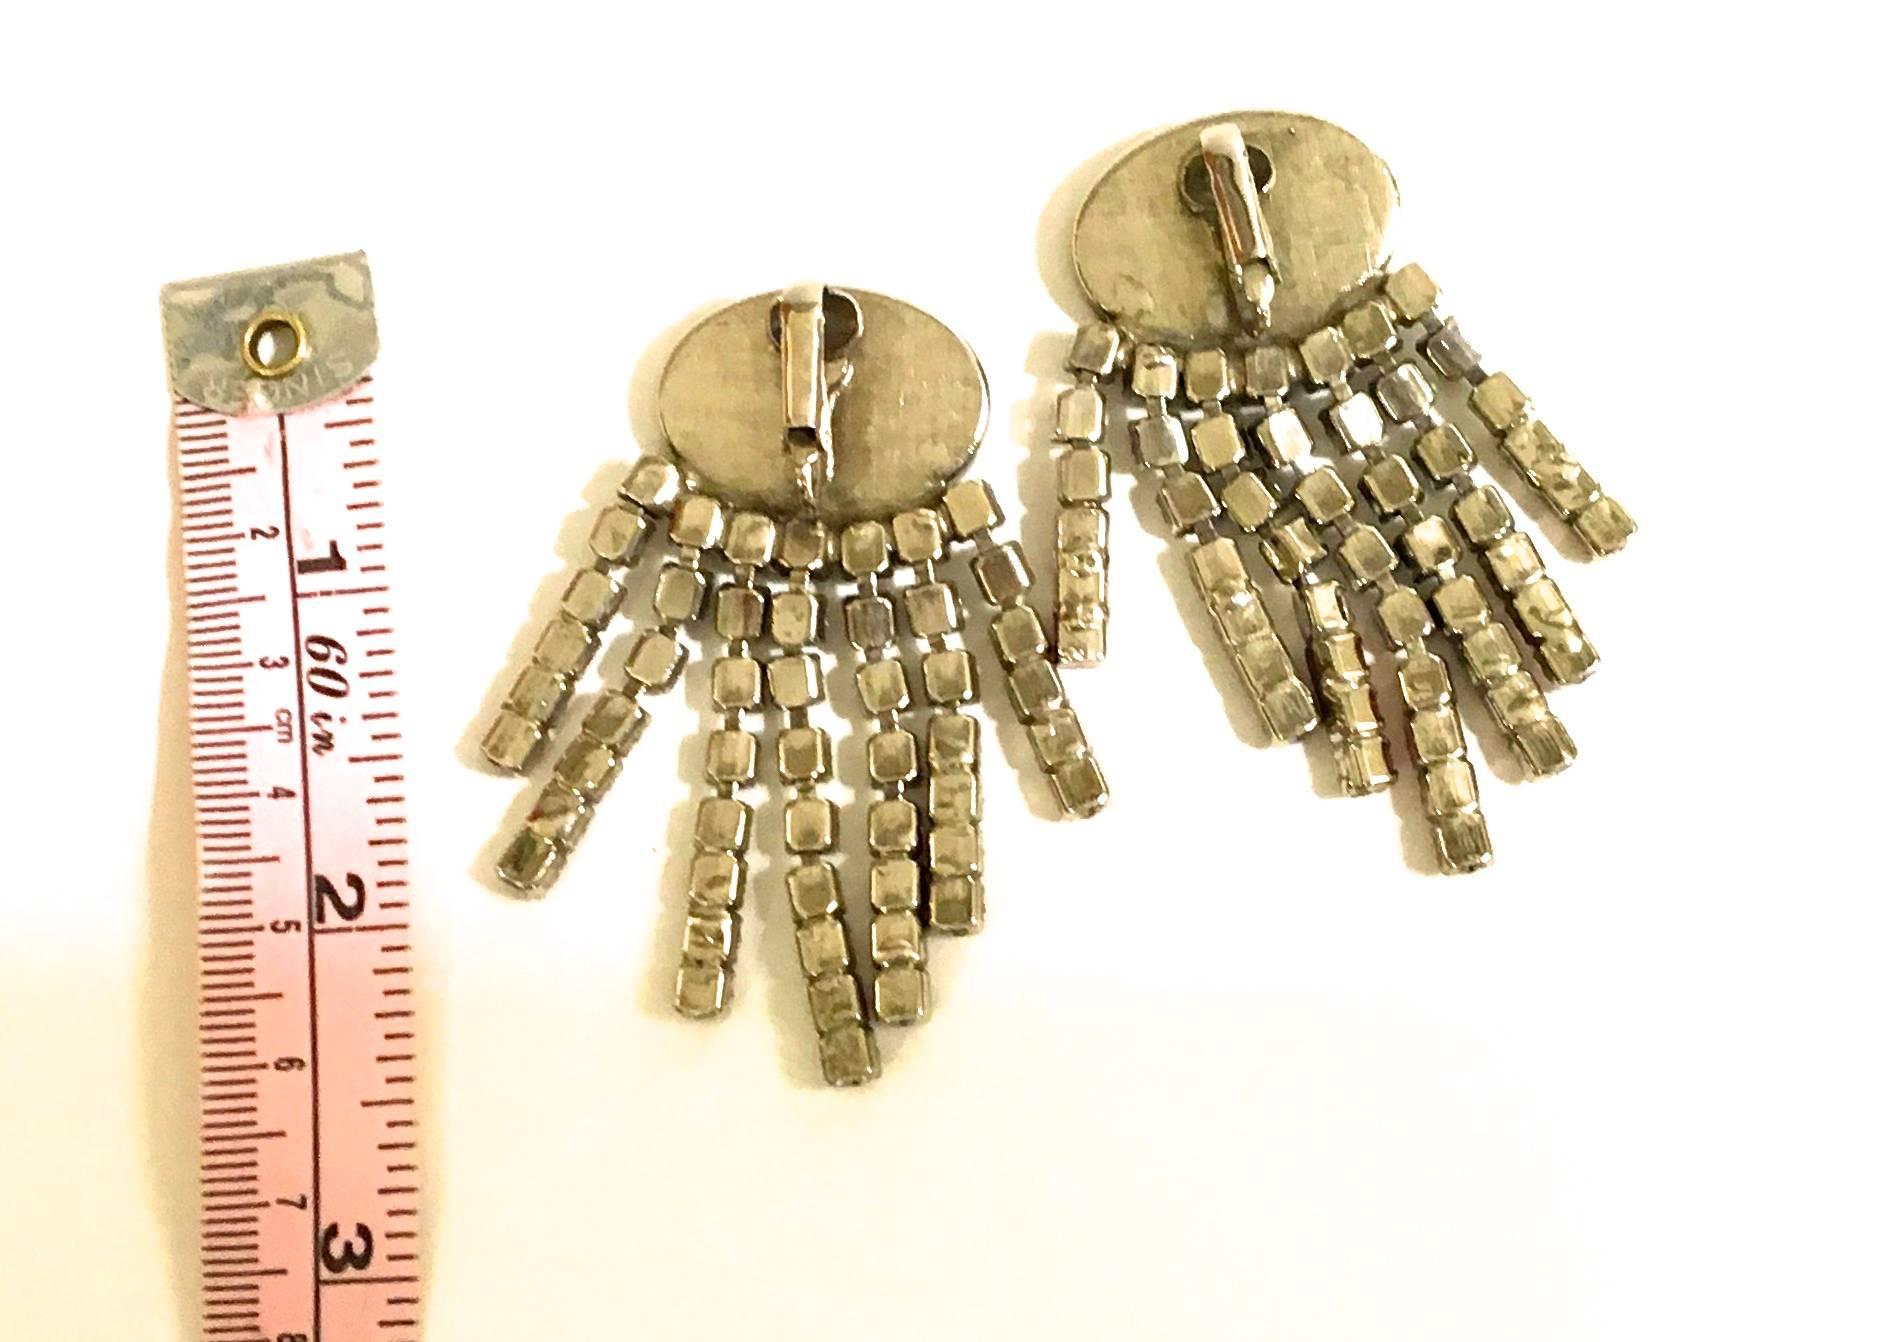 Presented here is a beautiful pair of earrings from the 1950's. The earrings are comprised of oval red stones housed in silver tone metal. Dangling from the oval shapes are white and red rhinestones in stringed lines. The earrings have clips on the